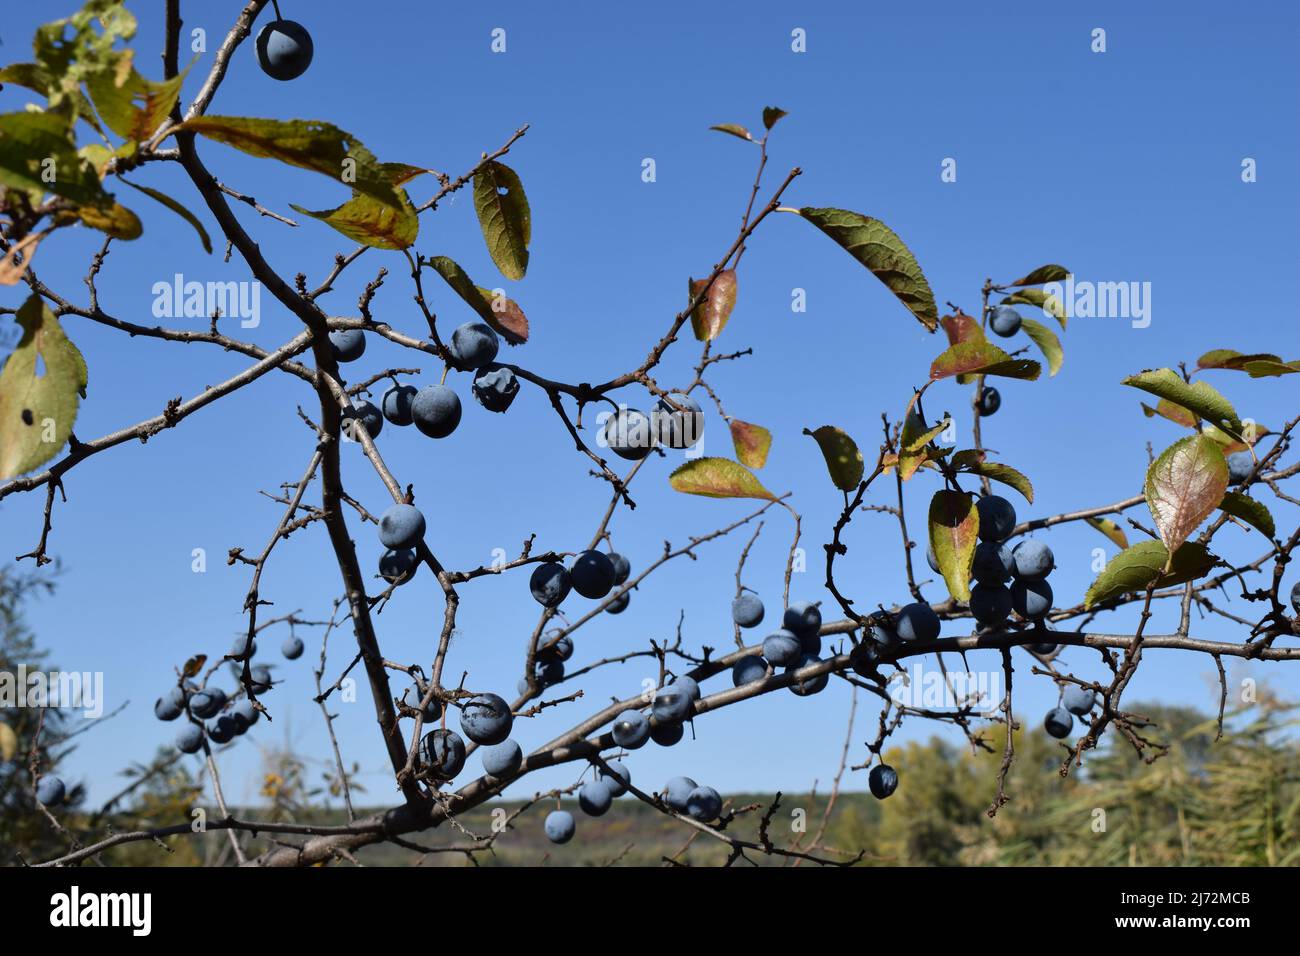 A forest thorn bush with ripe blue fruits in autumn. Blackthorn in autumn. a thorny Eurasian shrub with blue berryes on thorn twig at autumn time. Stock Photo